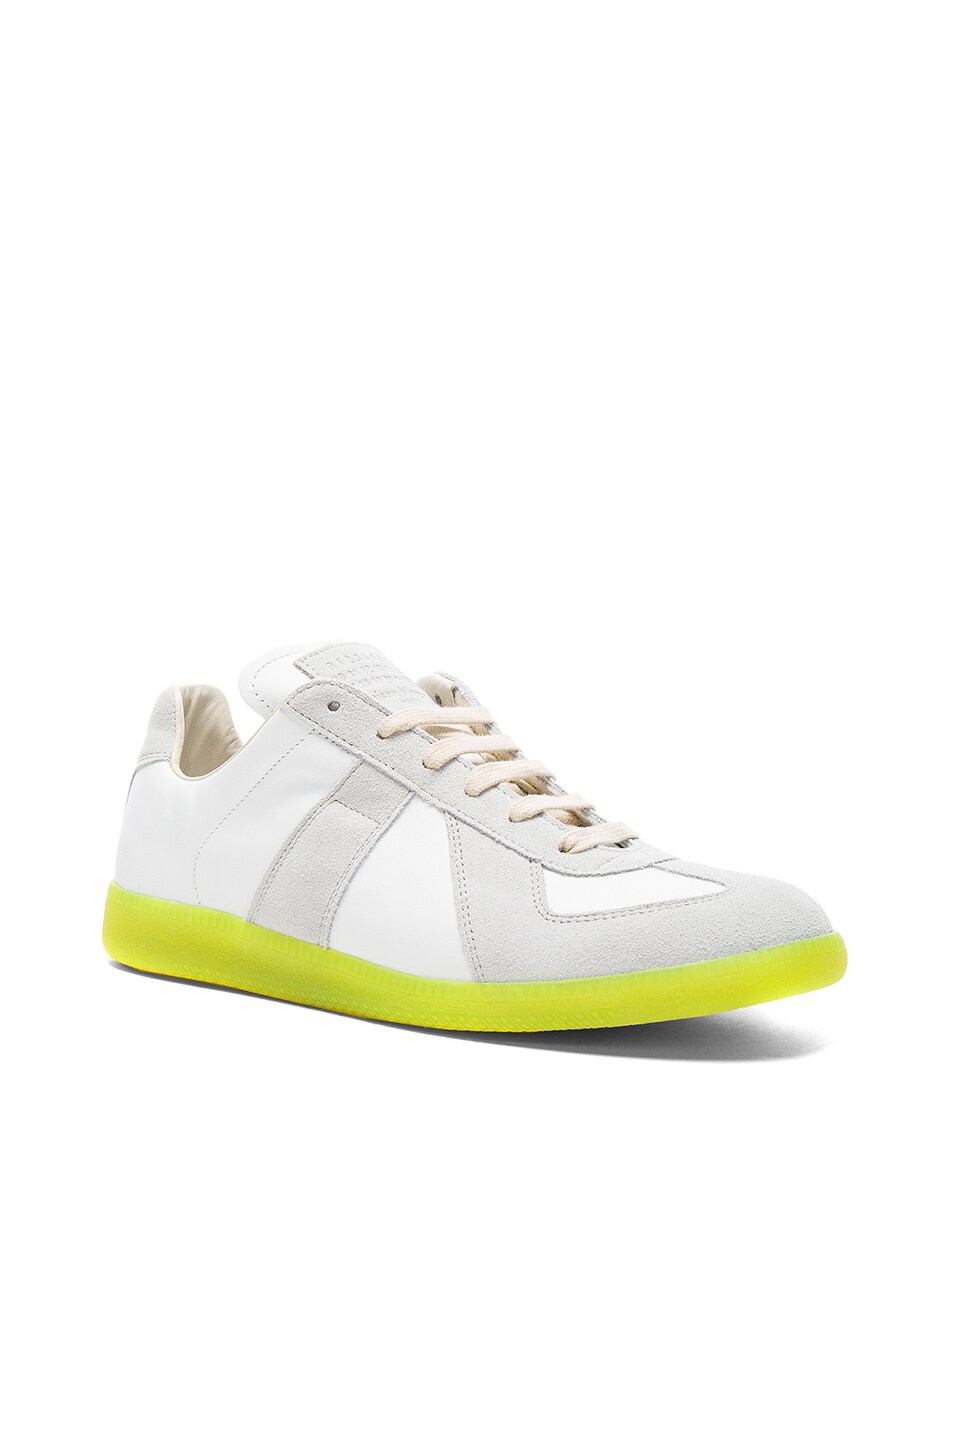 Image 1 of Maison Margiela Leather Replica Sneakers in Off White & Yellow